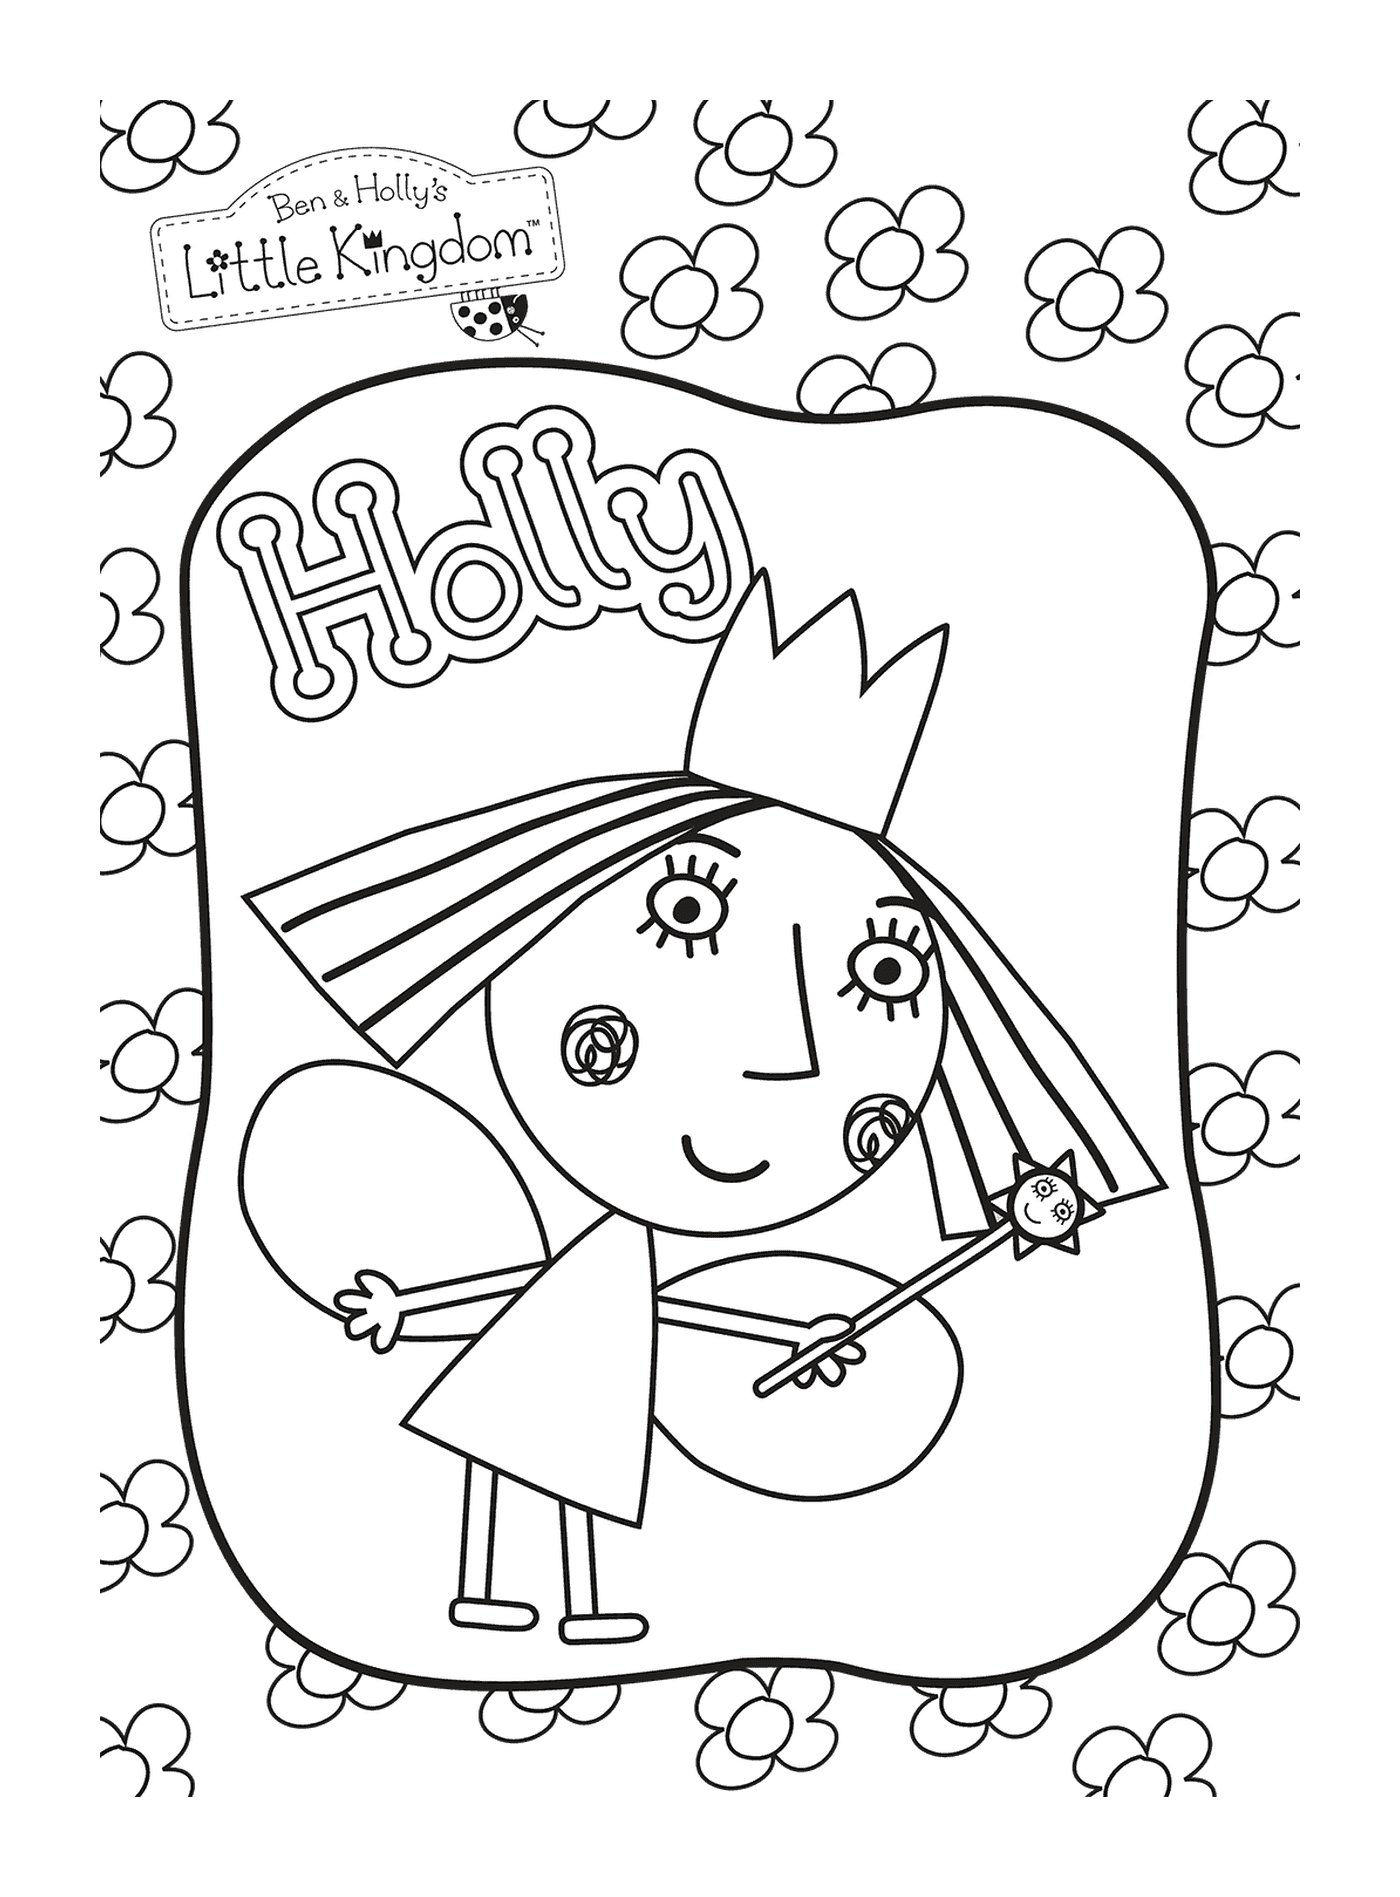  Holly The Little Kingdom of Ben and Holly 